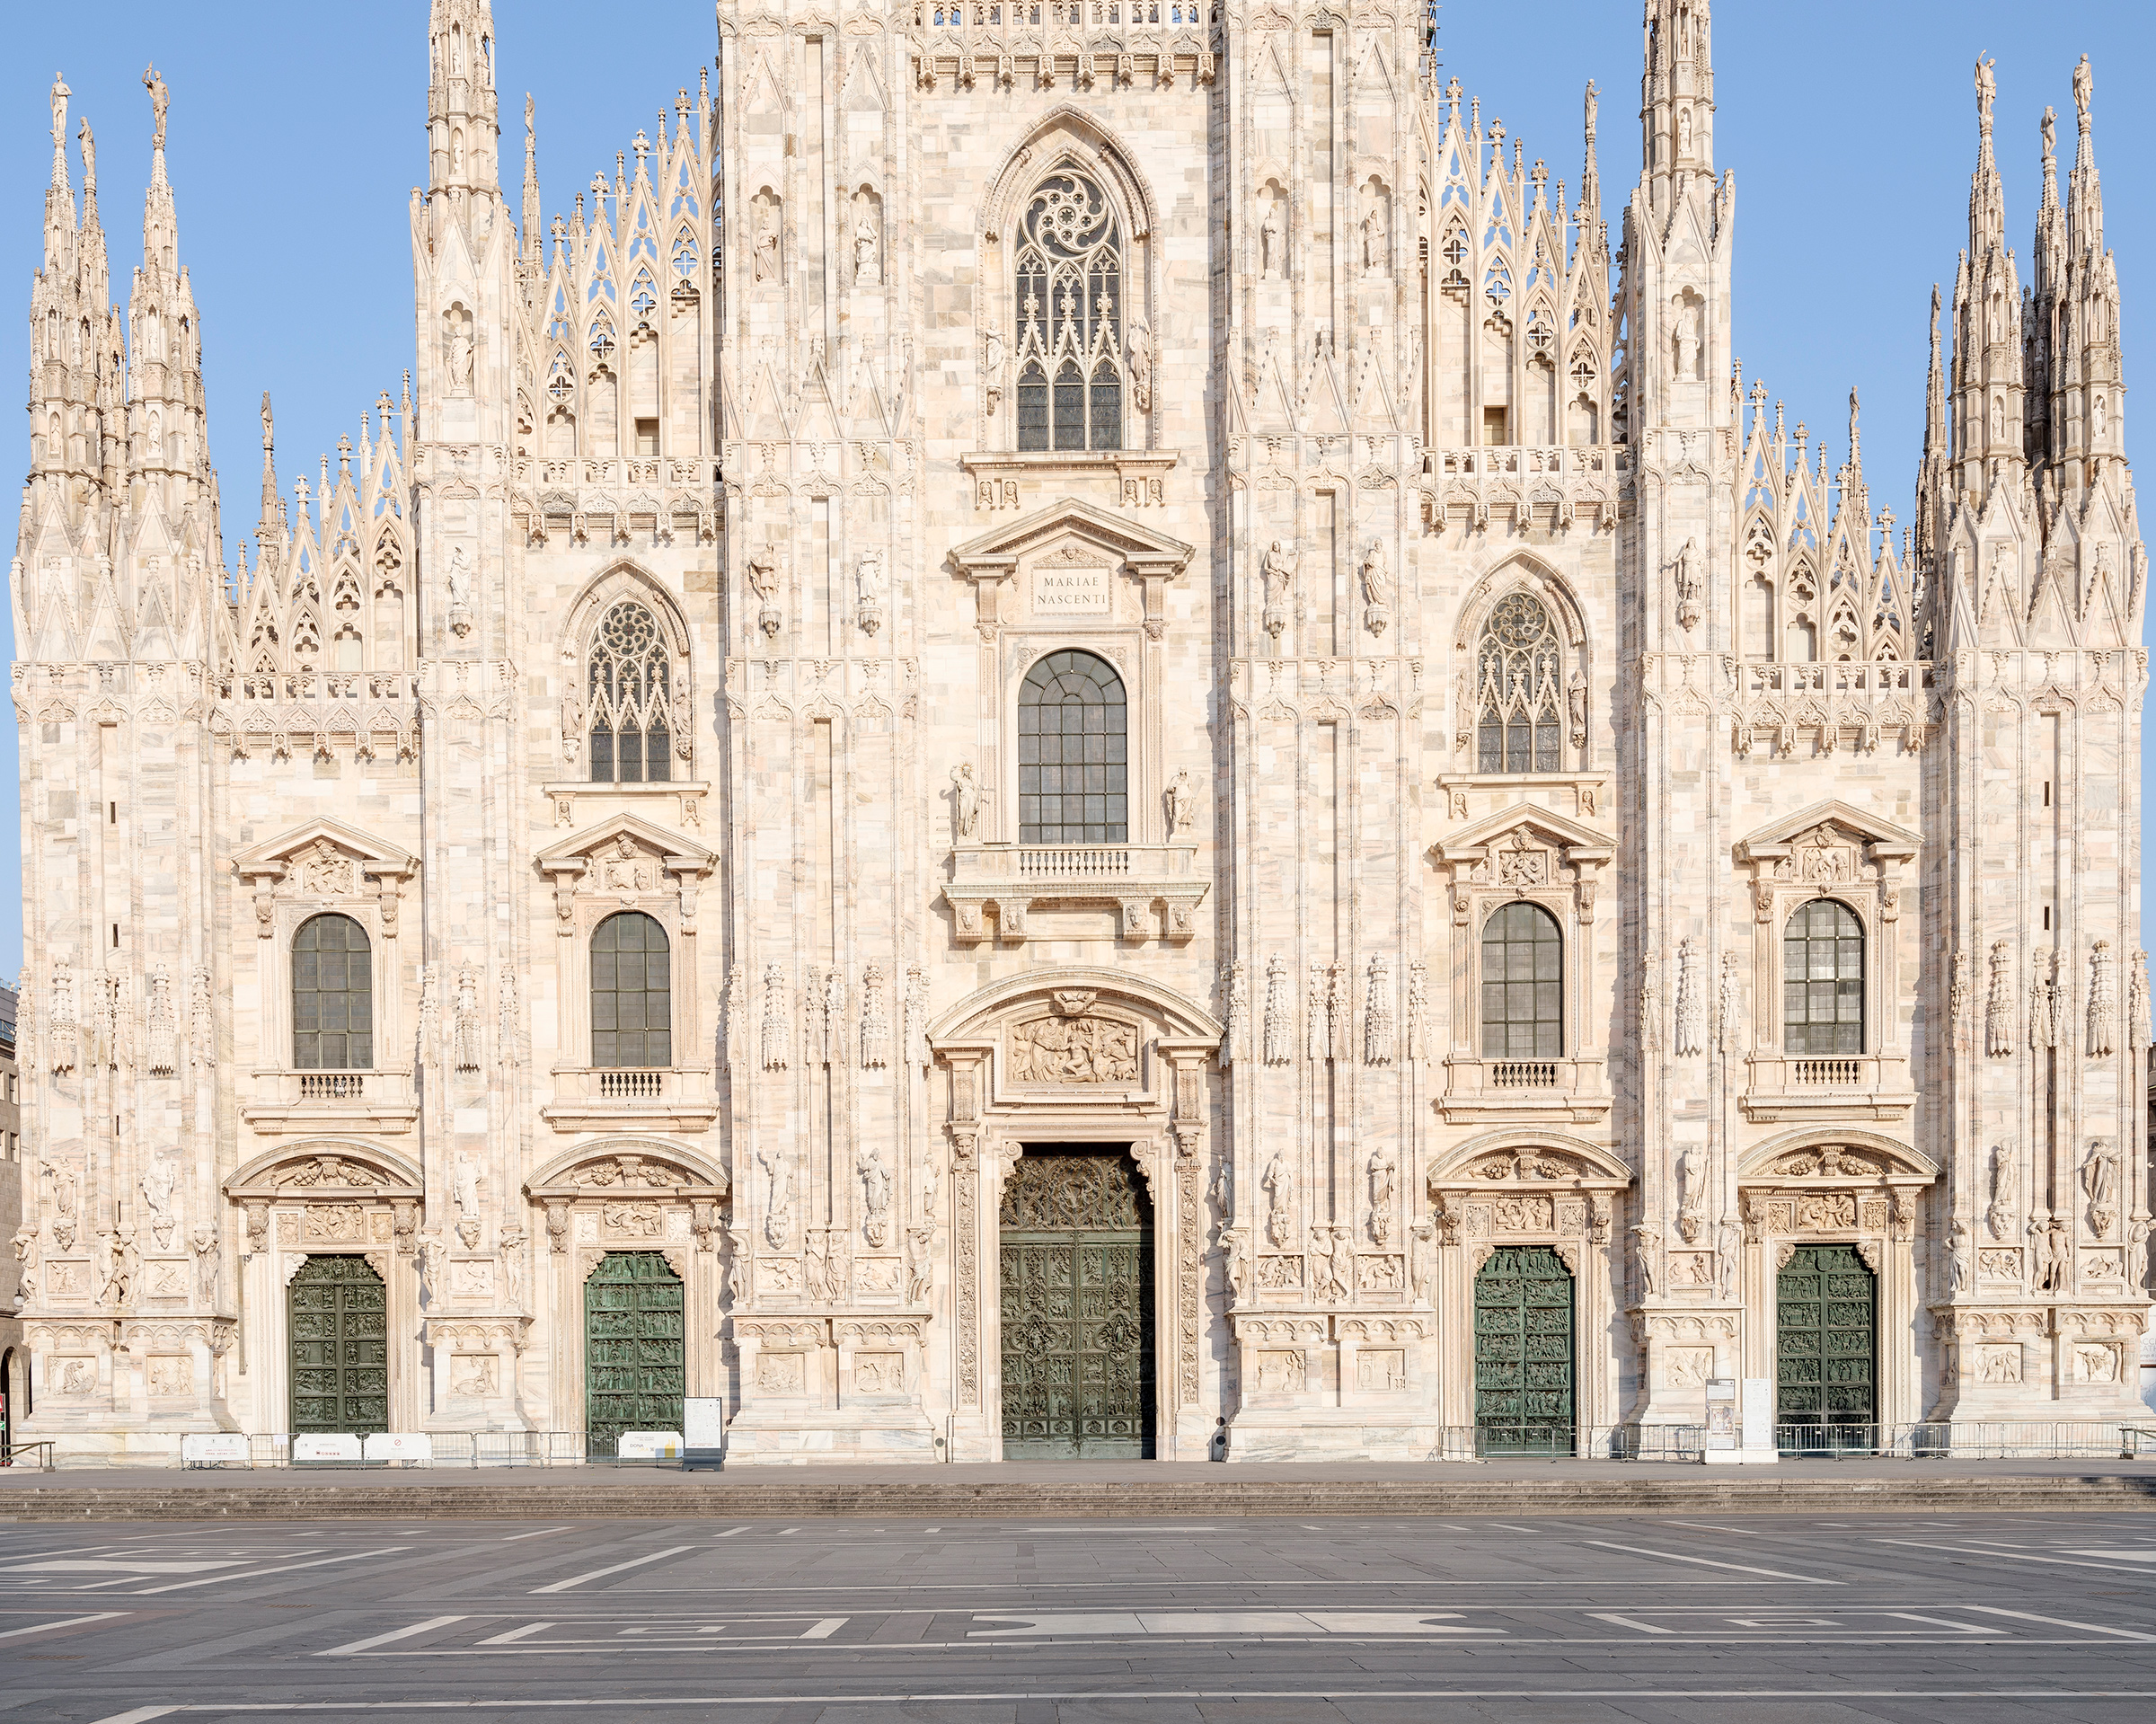 An empty Piazza del Duomo in Milan. The city was included in the early March lockdown of much of Italy's north, before the restrictions on movement were instituted nationwide. (Lorenzo Meloni—Magnum Photos for TIME)